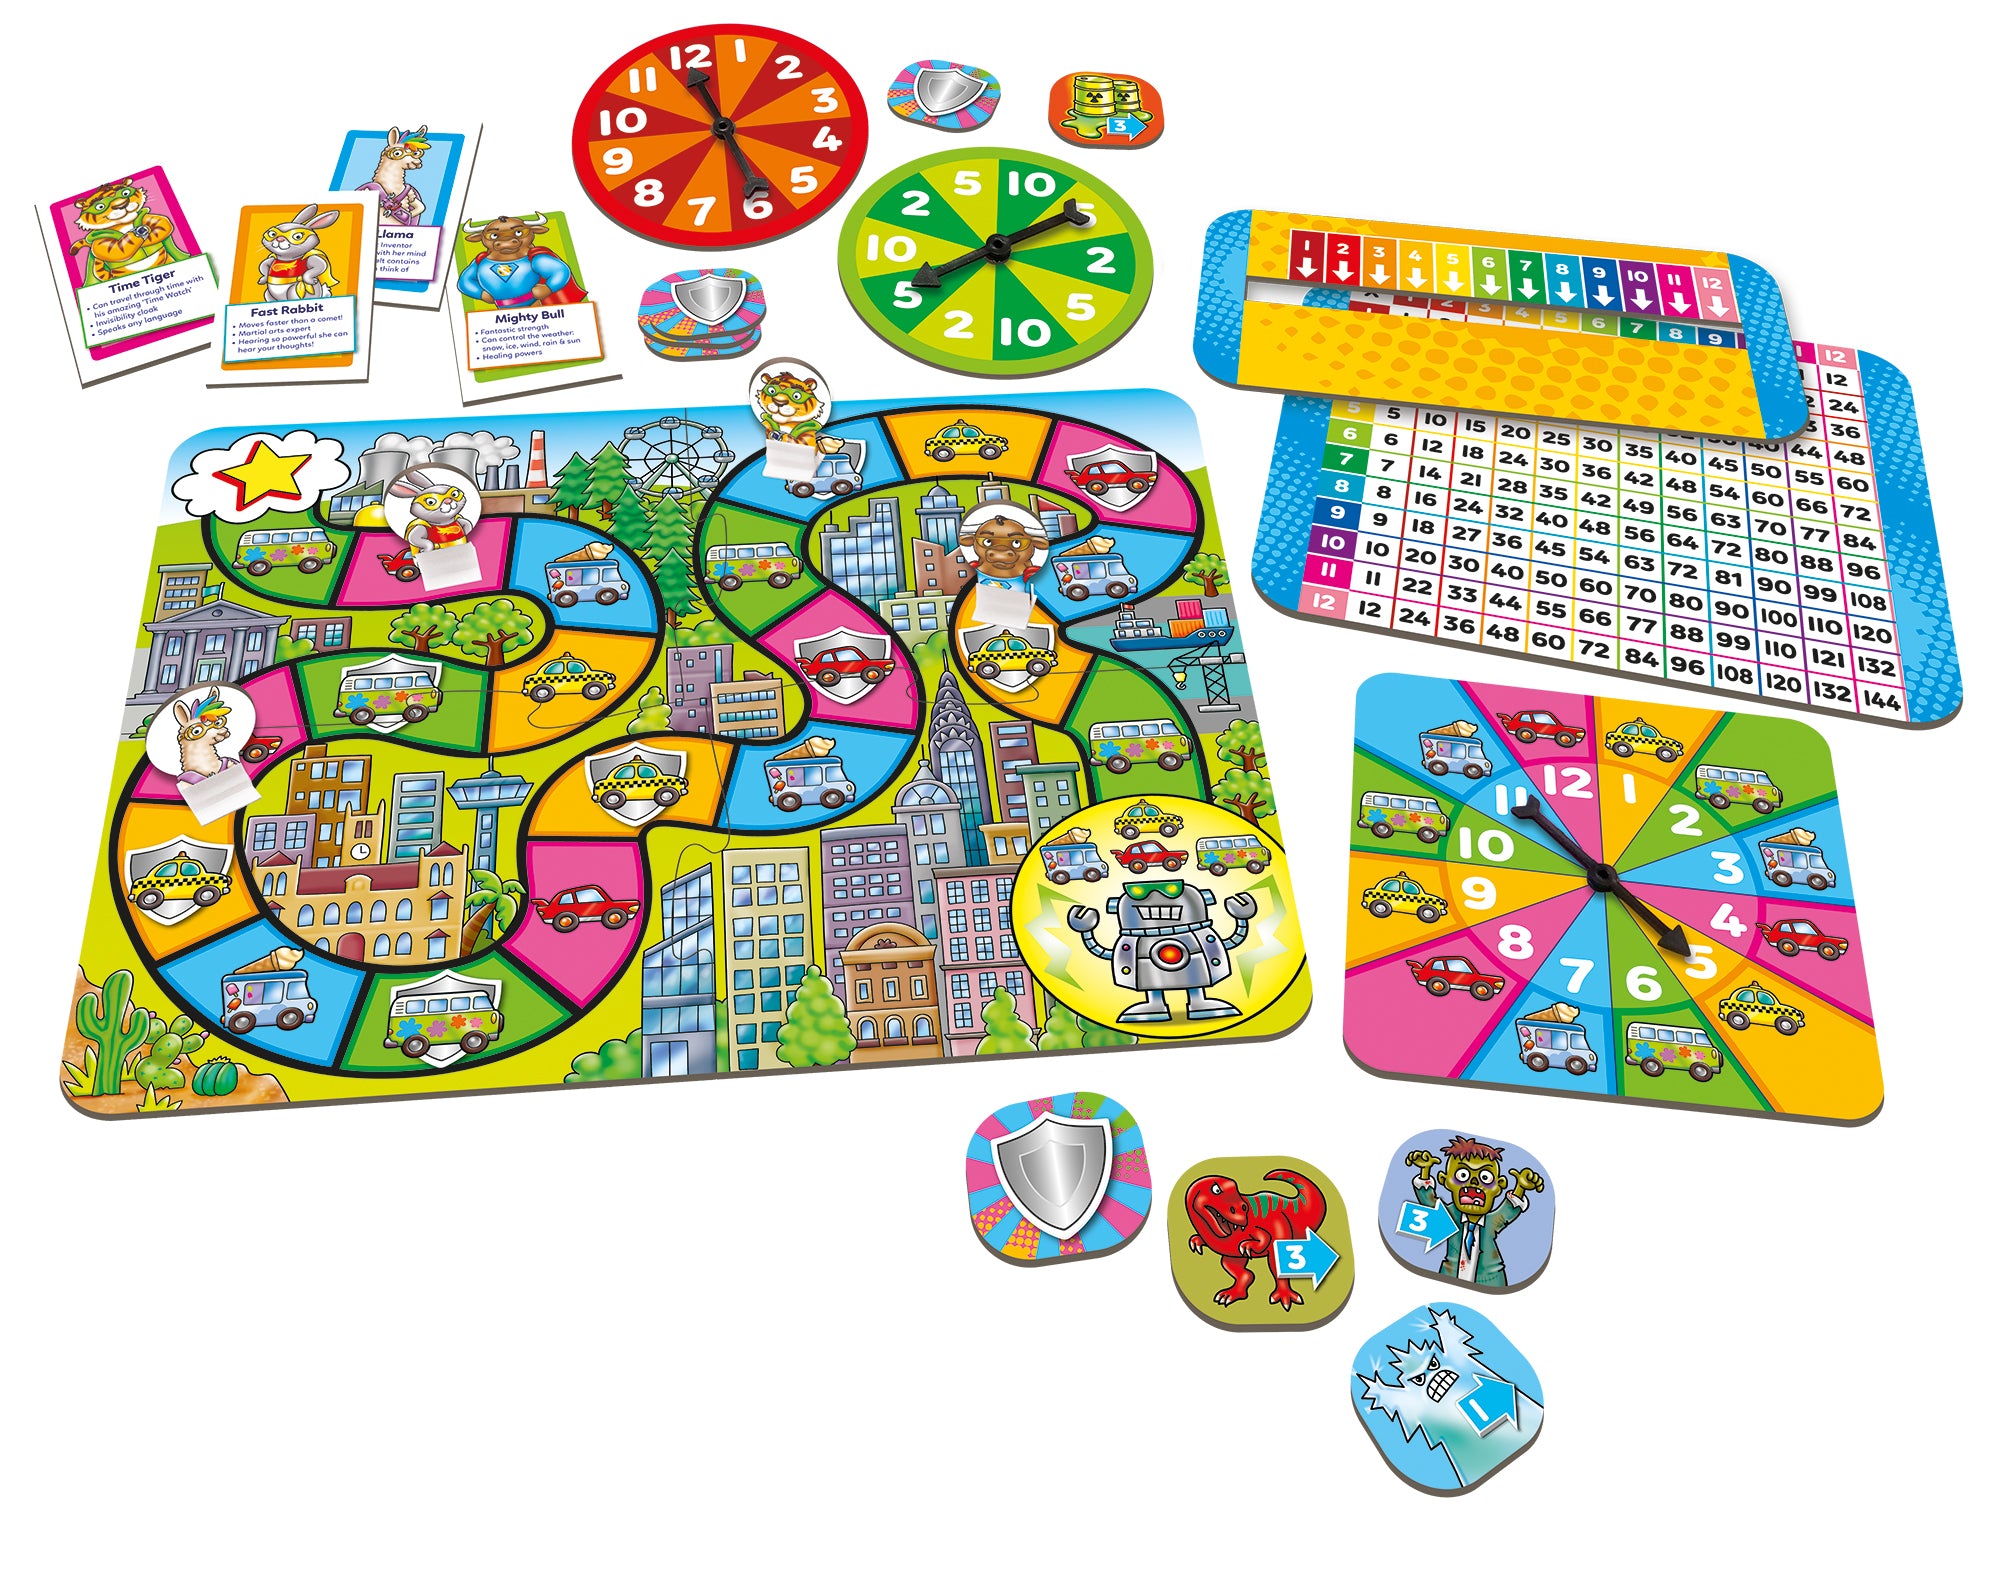 Orchard Toys Times Tables Heroes 2-in-1 Game